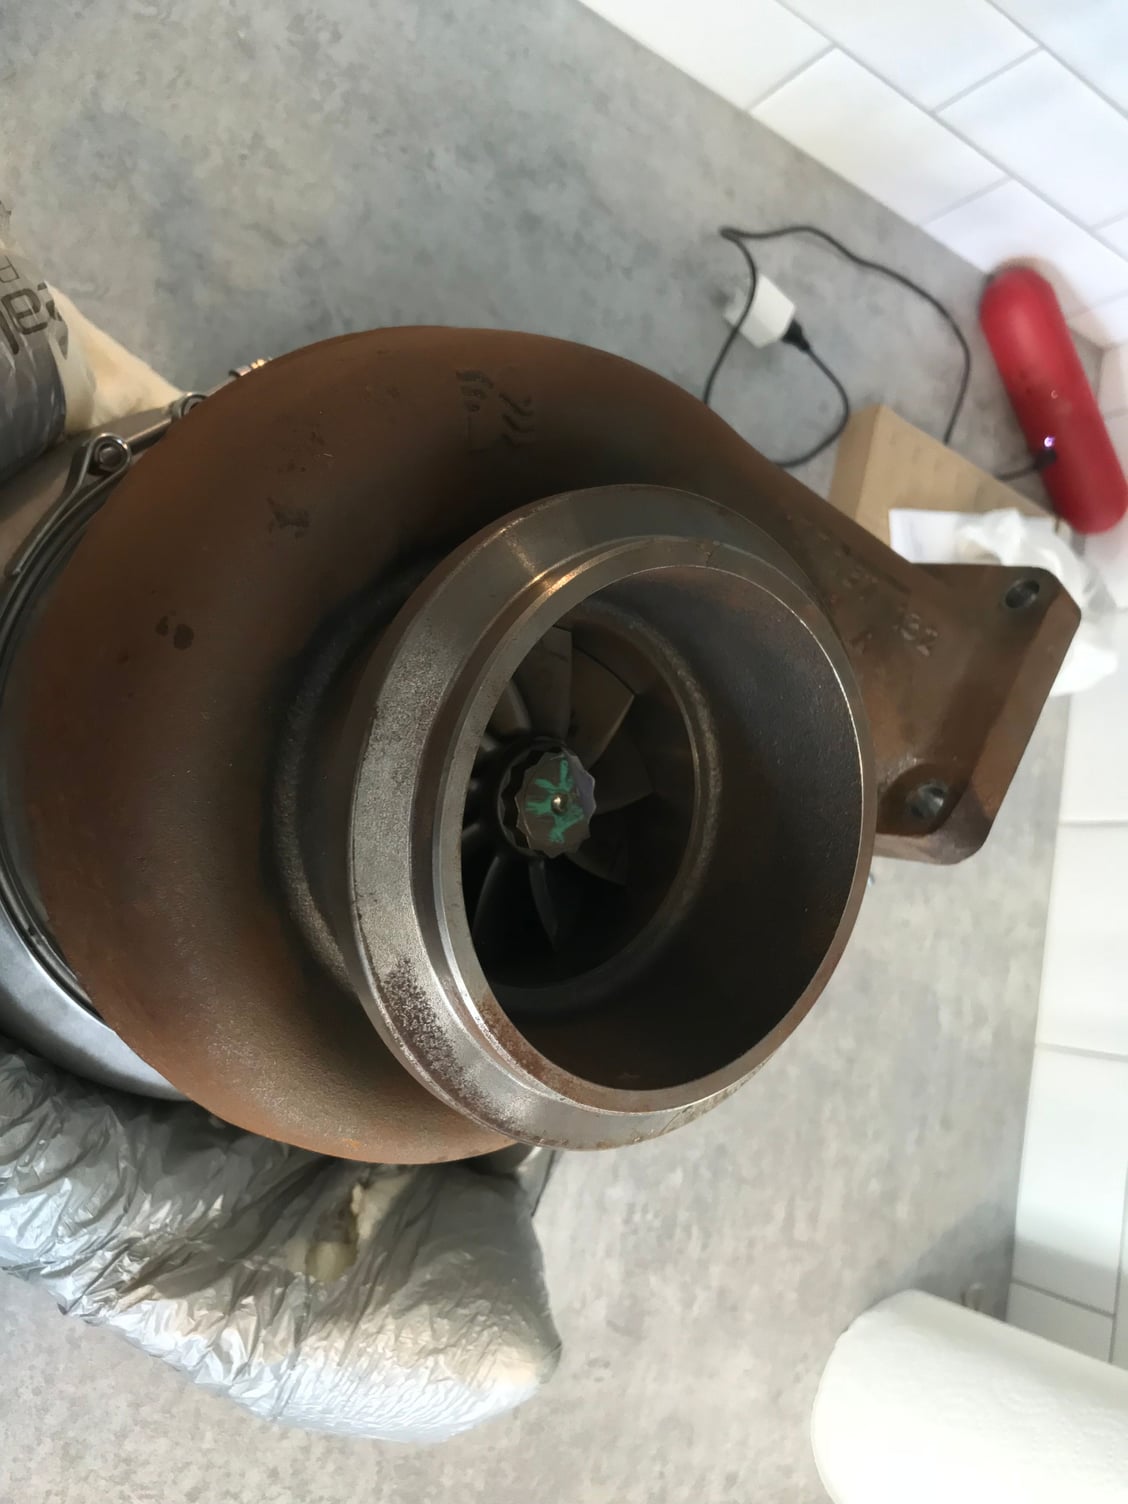  - 88mm Ball bearing turbo. Built by Midwest Turbos - Boise, ID 83605, United States